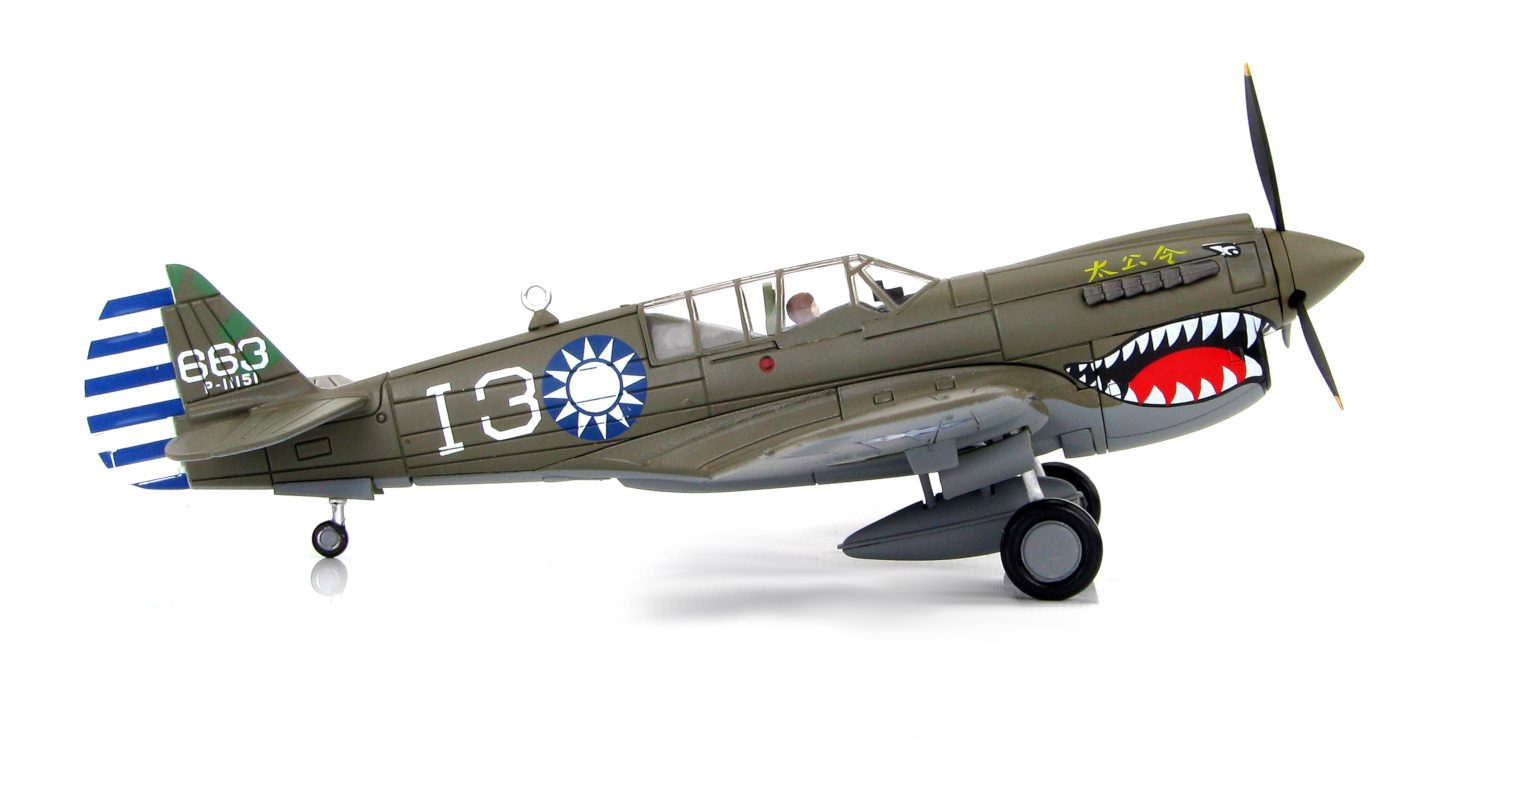 Starboard side view of Hobby Master HA5501 - 1/72 scale diecast model Curtis P-40N Warhawk, White 663, flown by Cpt Wang Kuangfu, 7th FS, 3rd FG, CACW, Laohokow, China, January 1945.